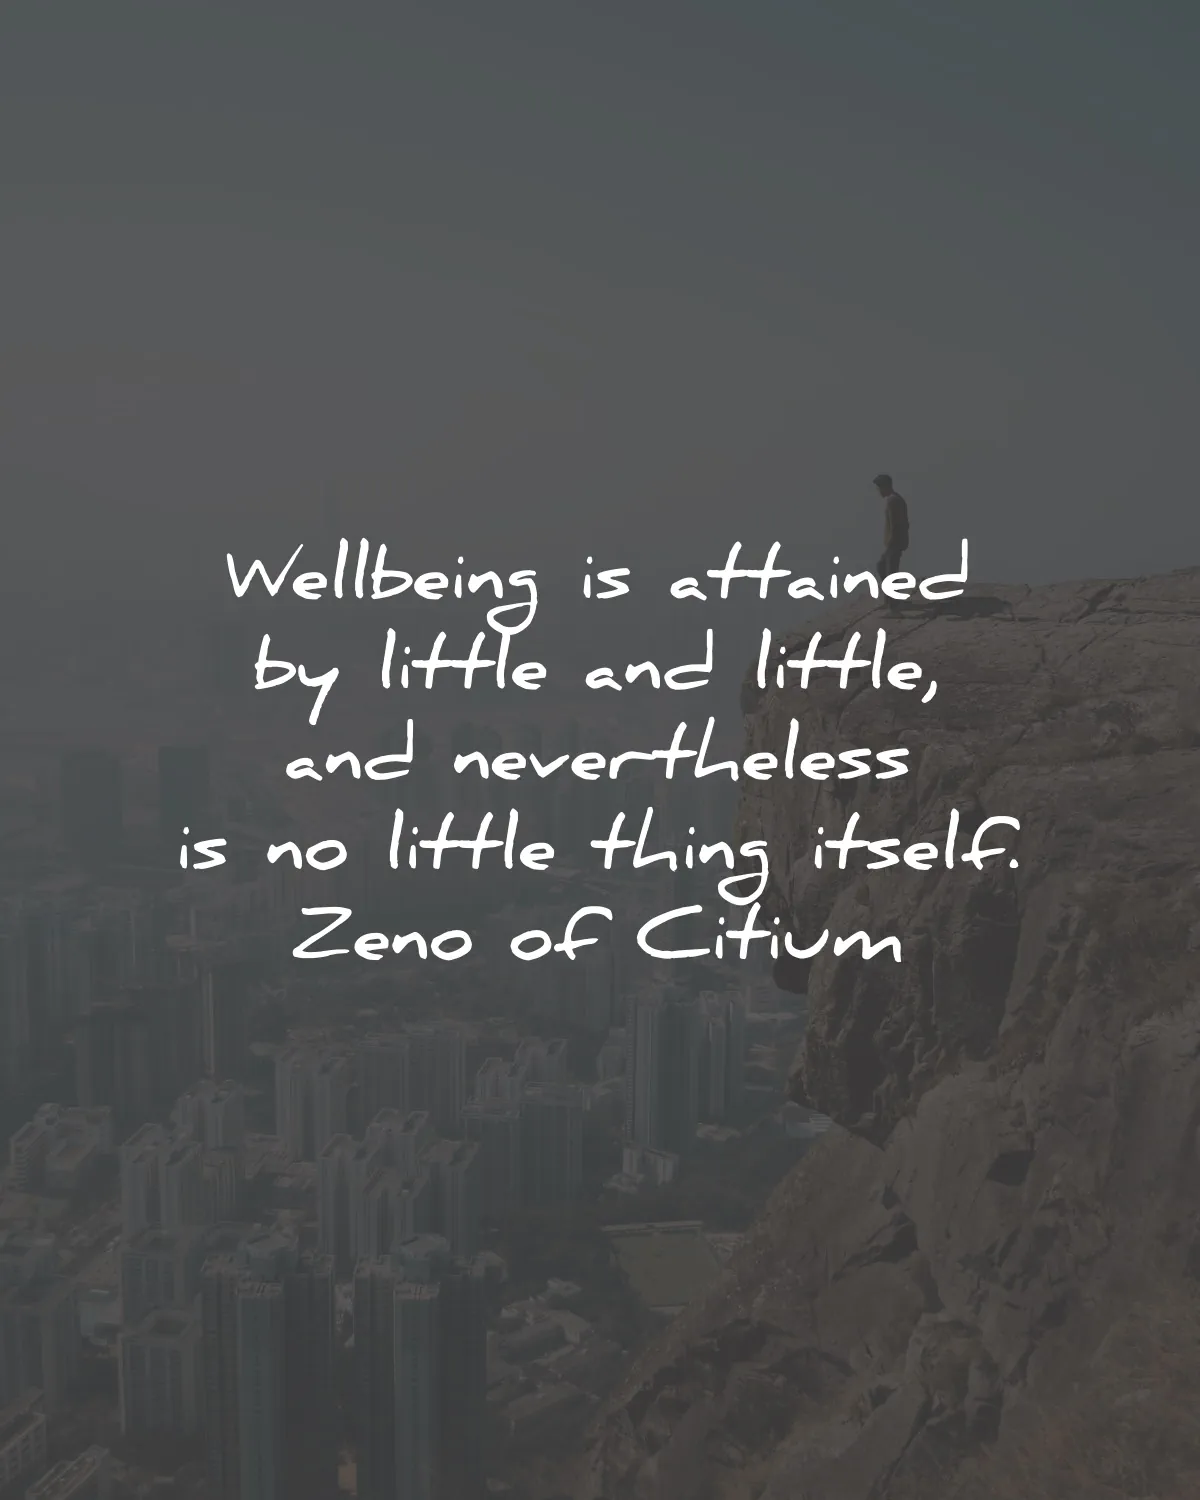 zeno of citium quotes wellbeing attainted little nevertheless wisdom